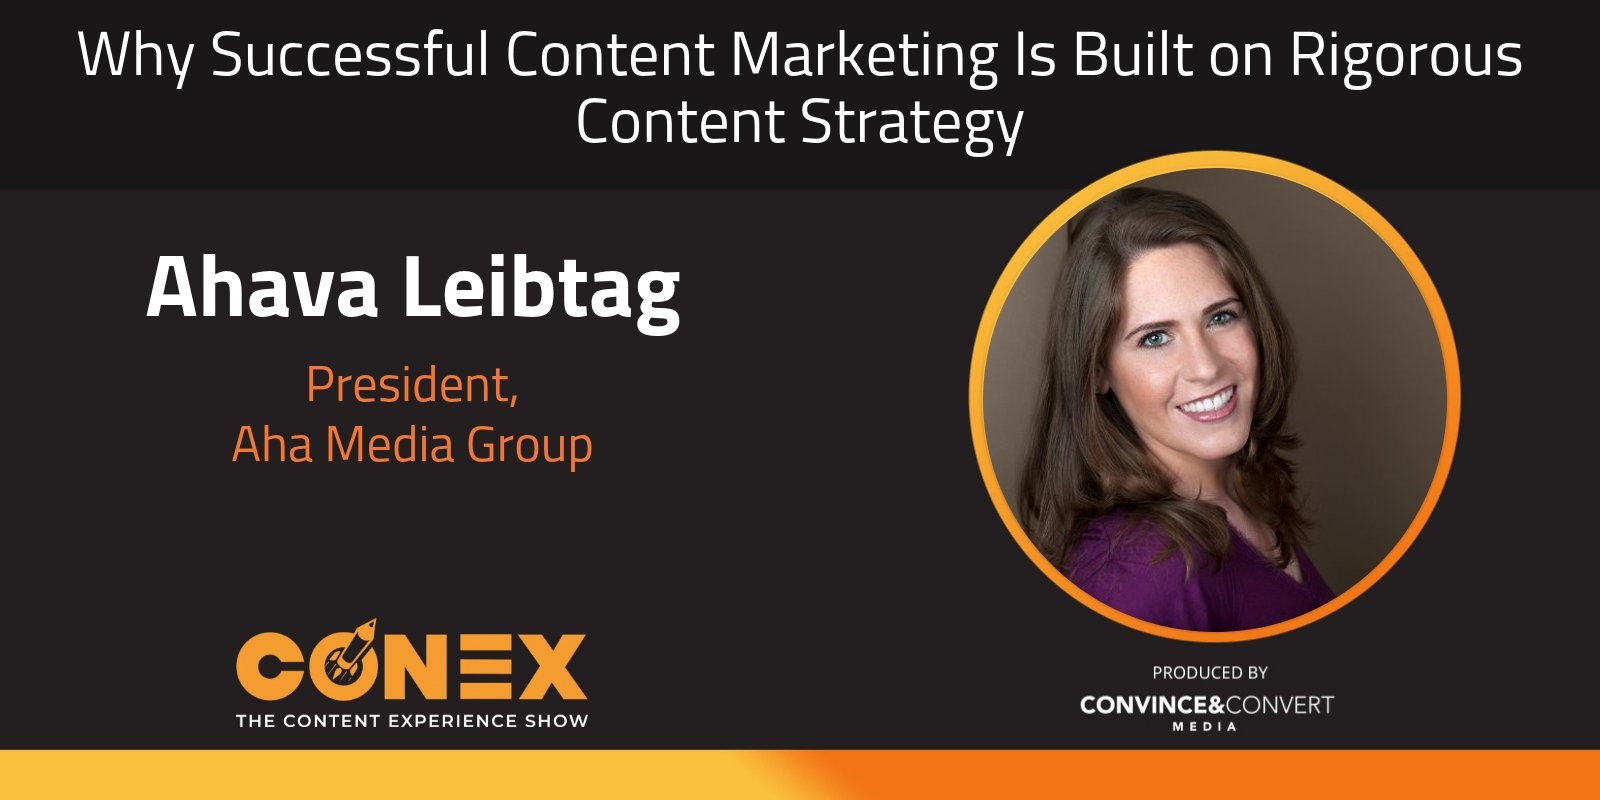 Why Successful Content Marketing Is Built on Rigorous Content Strategy